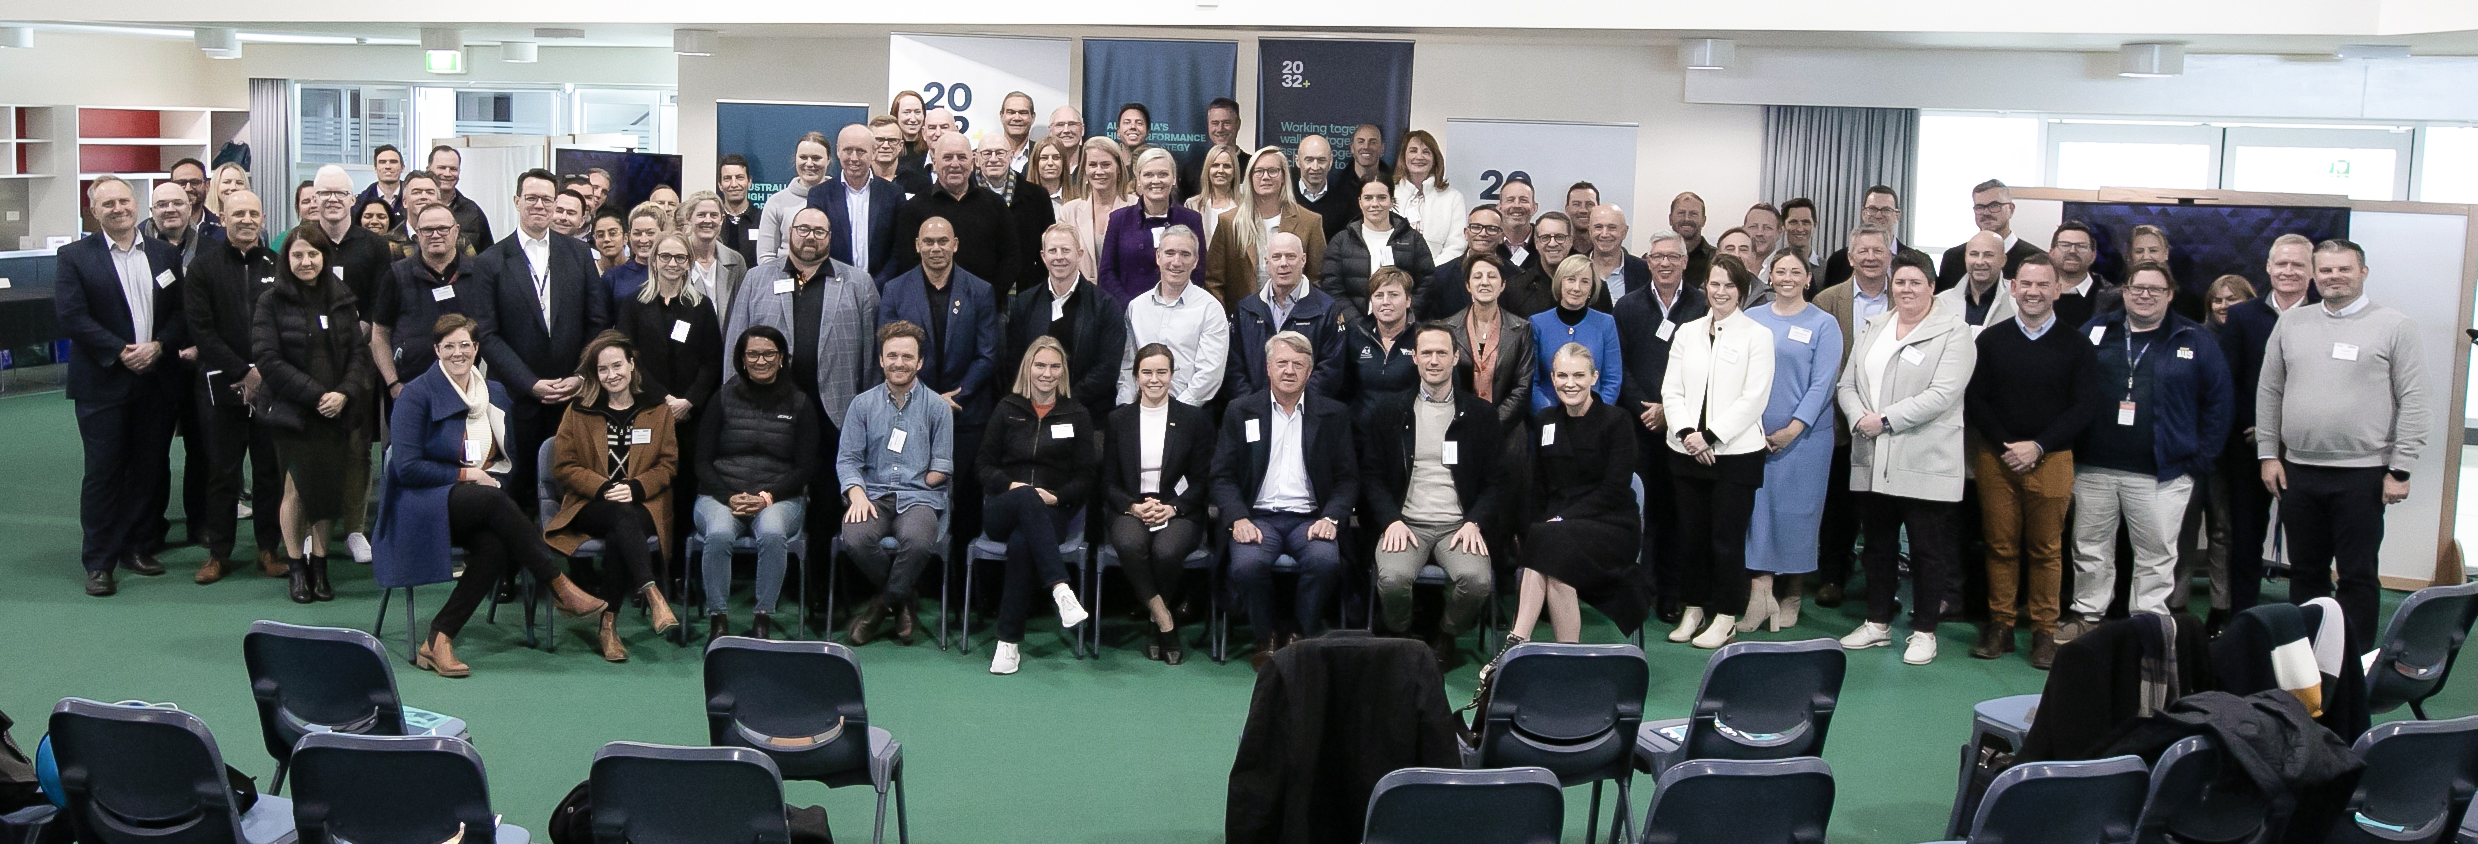 More than 100 people from across the Australian high performance sport system gathered at the AIS in Canberra for the HP 2032+ Strategy Forum.